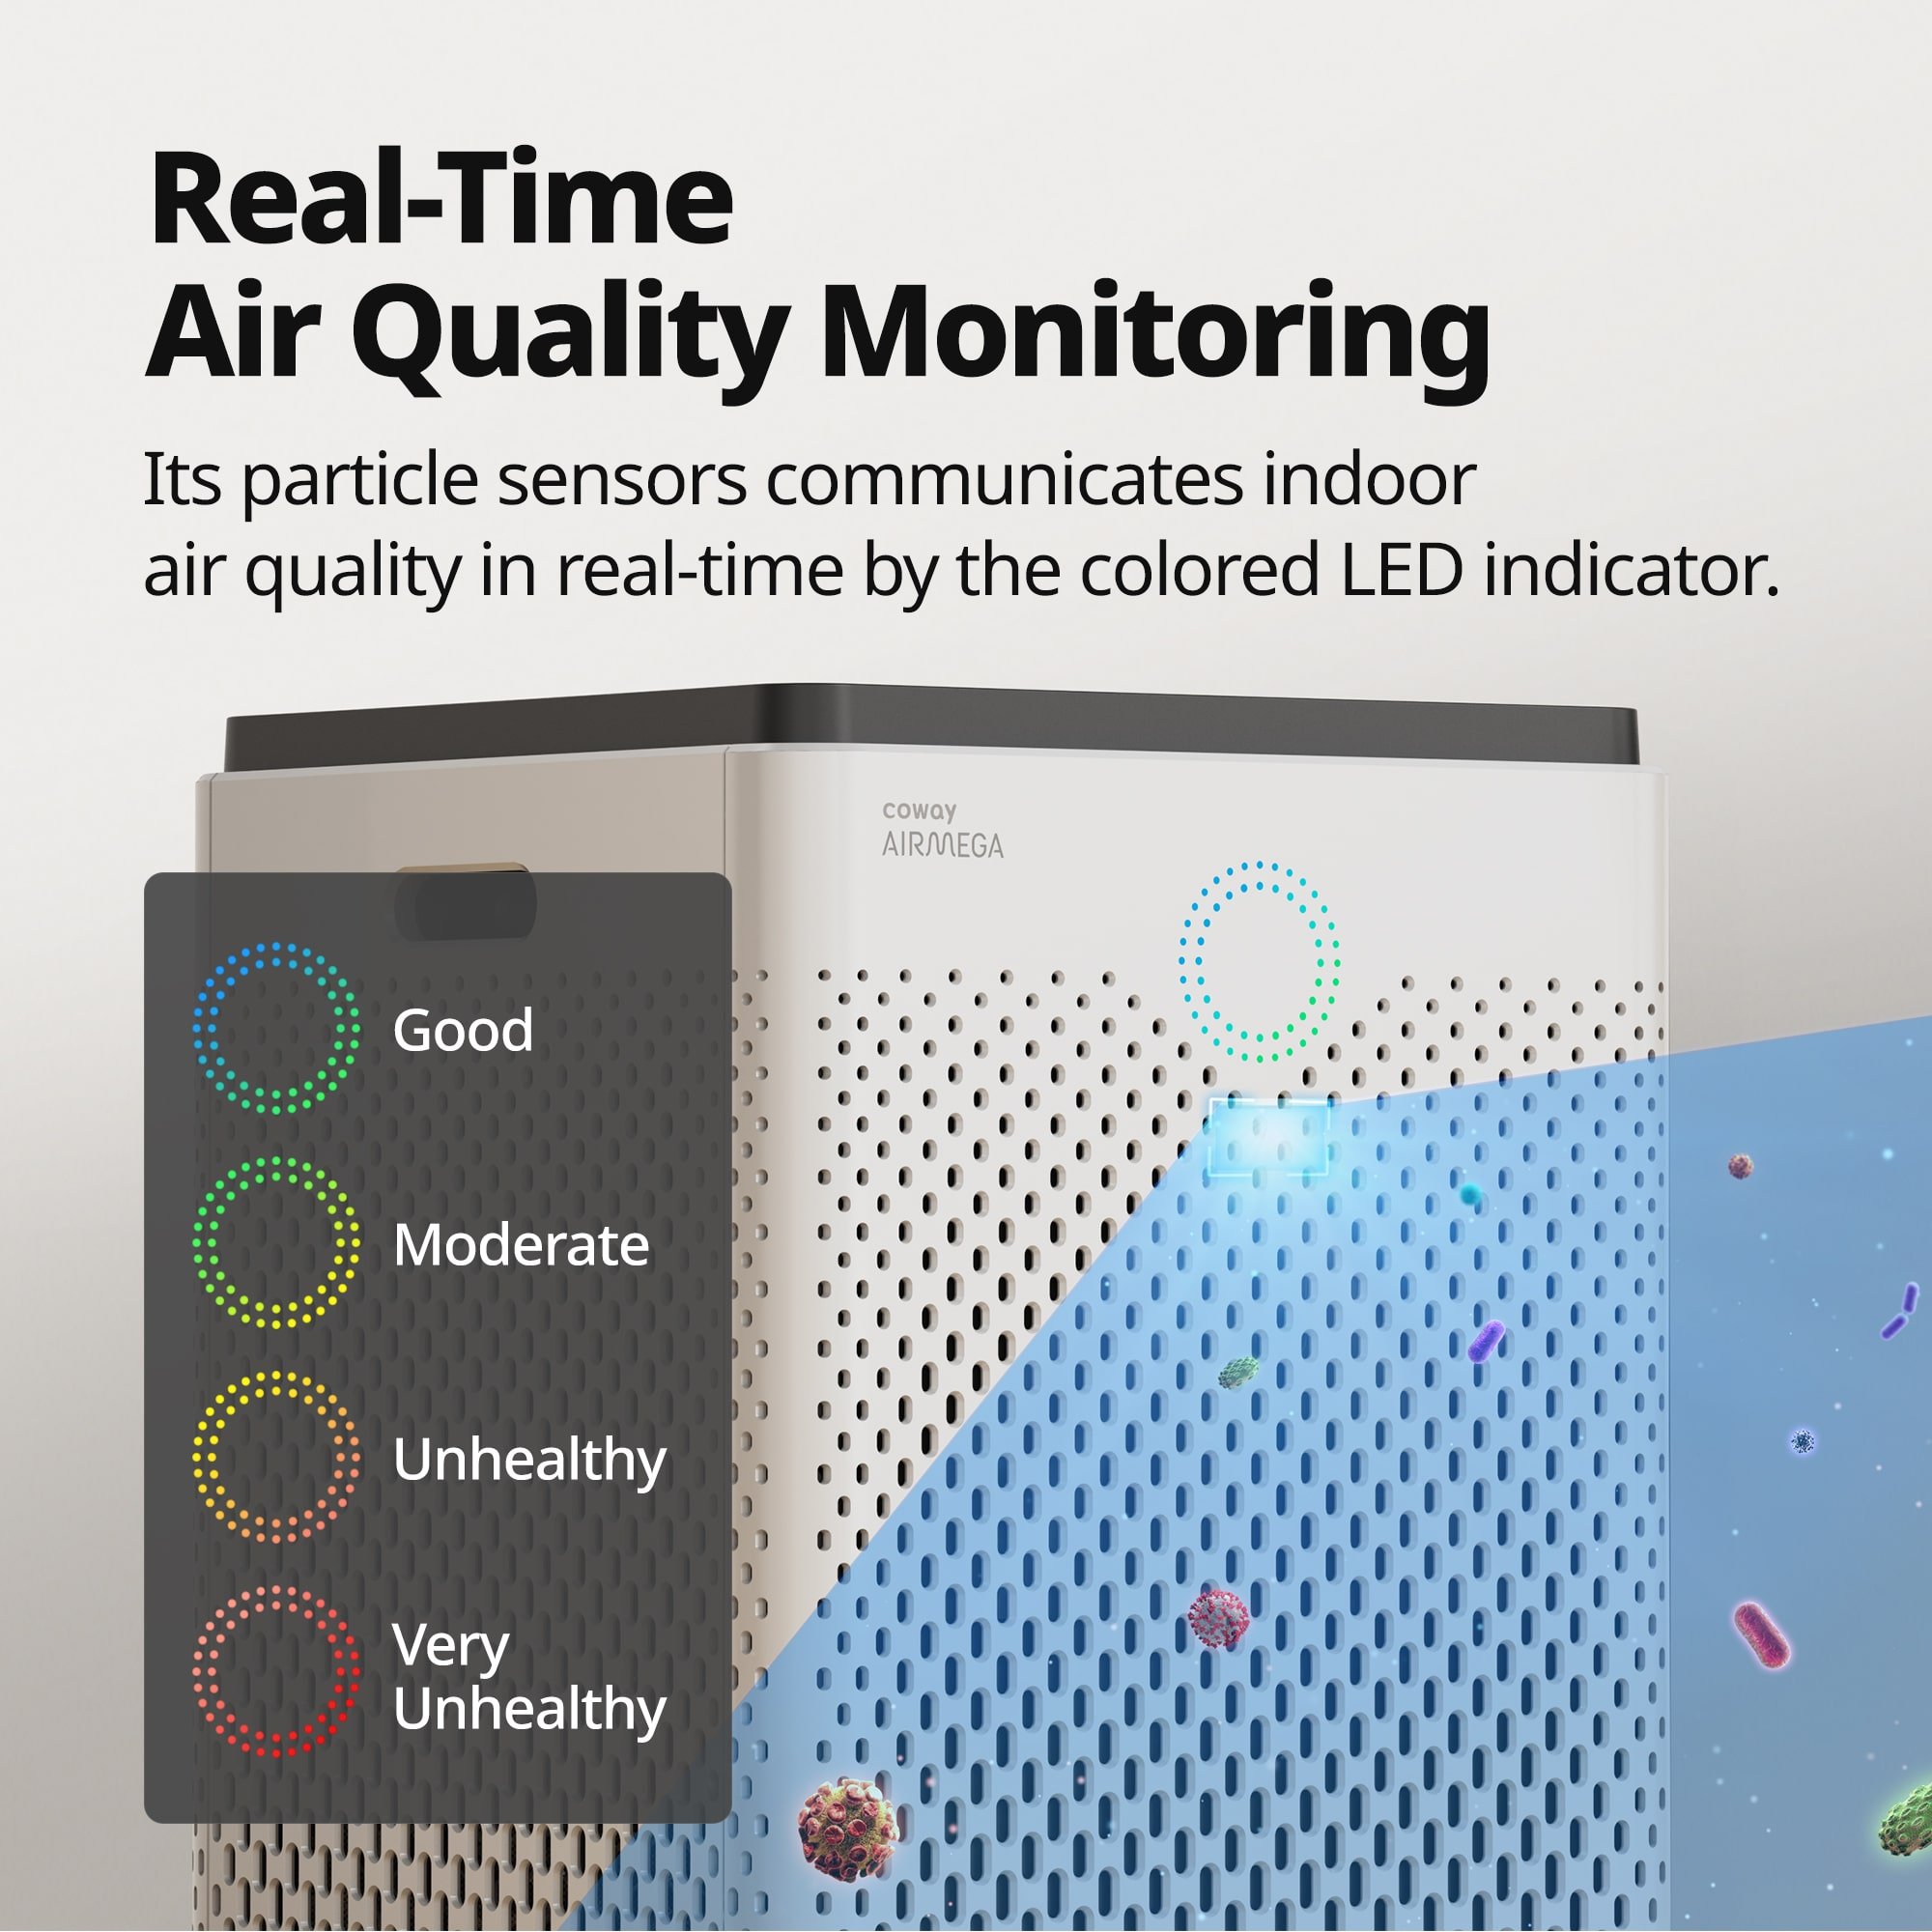 Real-time Air Quality Monitoring